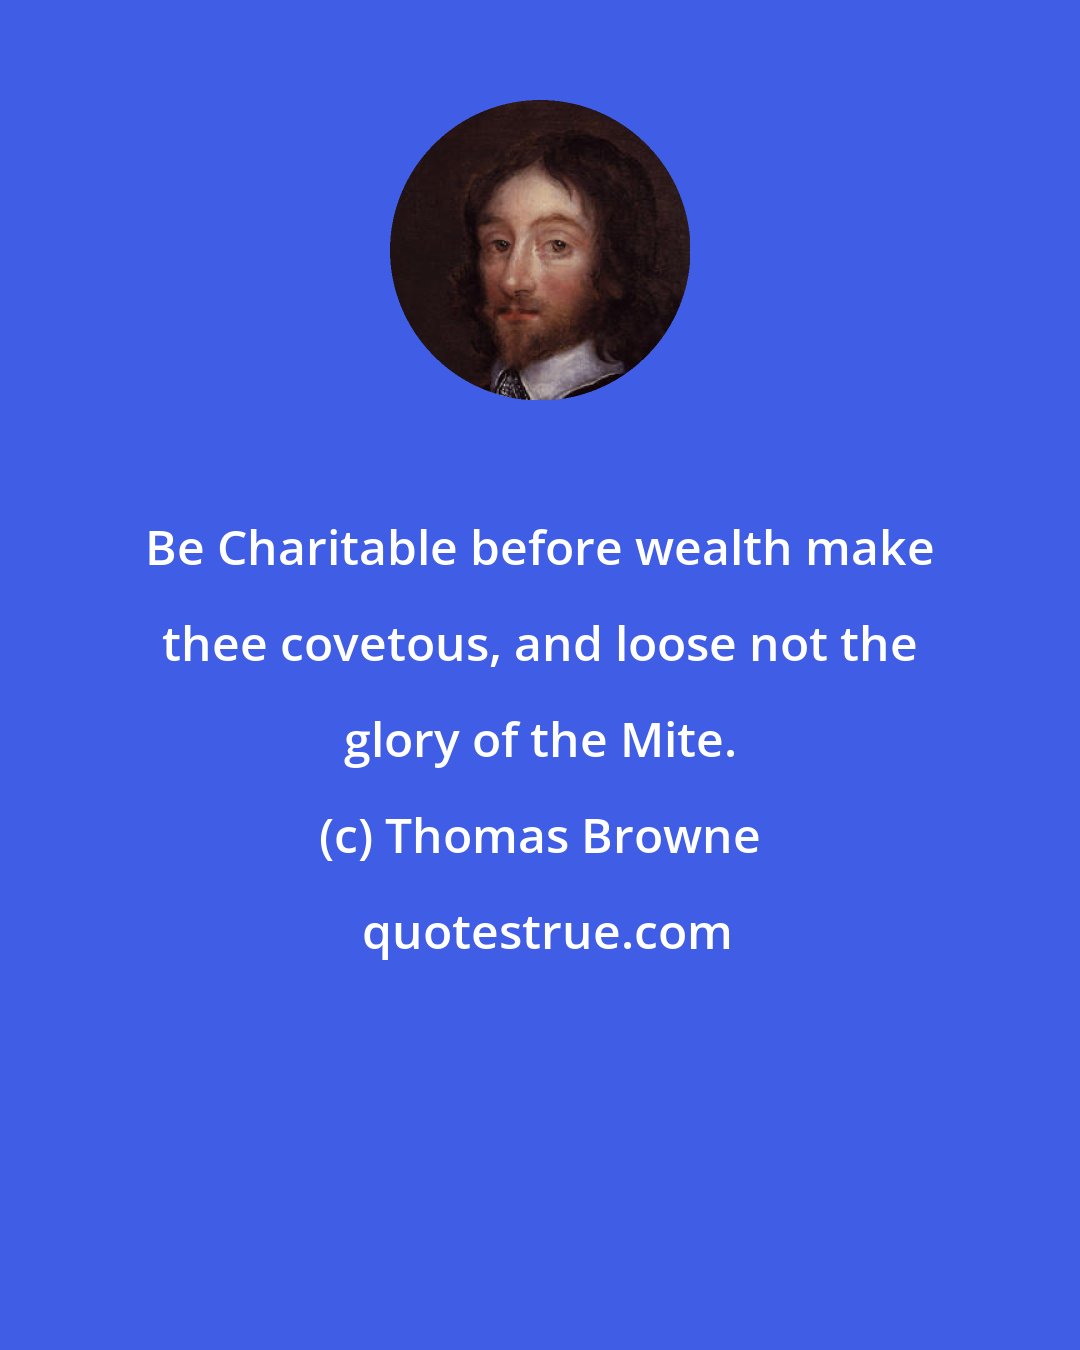 Thomas Browne: Be Charitable before wealth make thee covetous, and loose not the glory of the Mite.